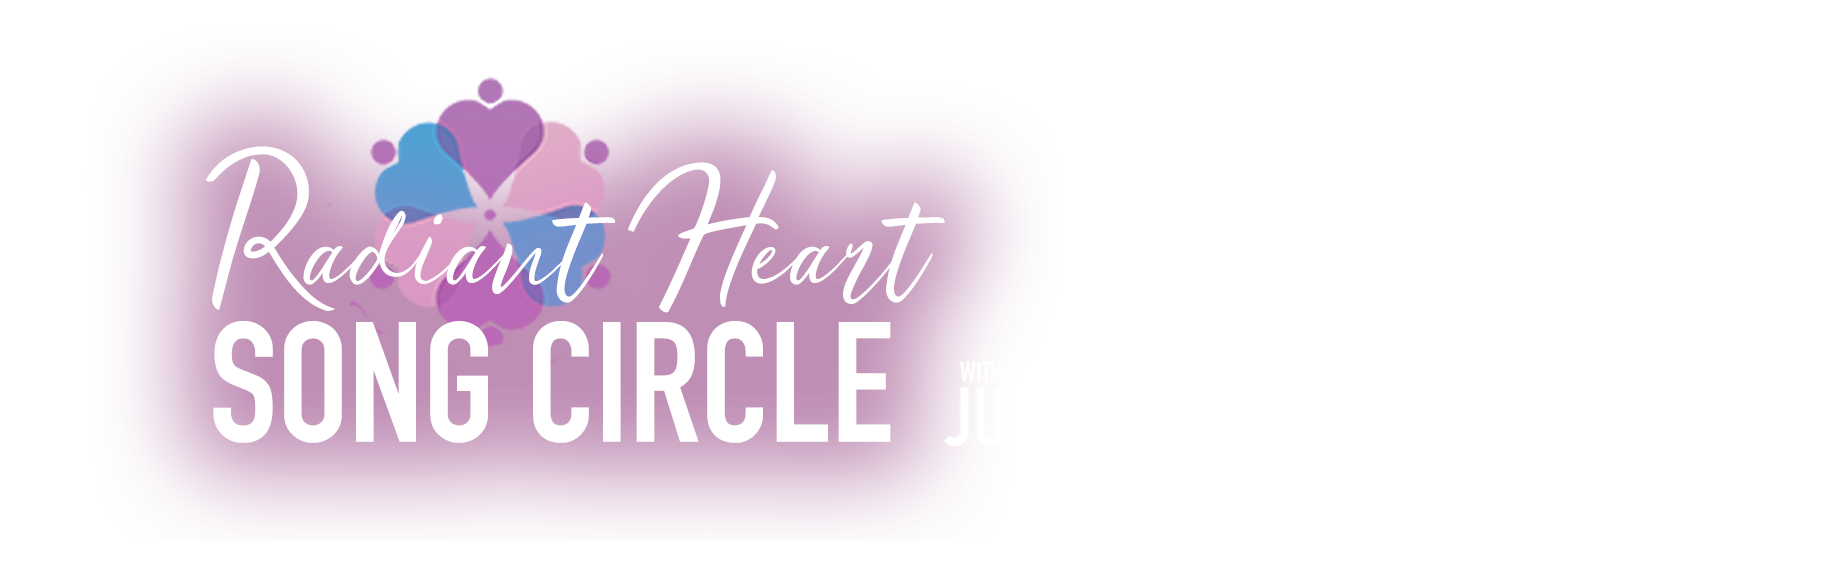 Radiant Heart Song Circle With Julie Blue - 